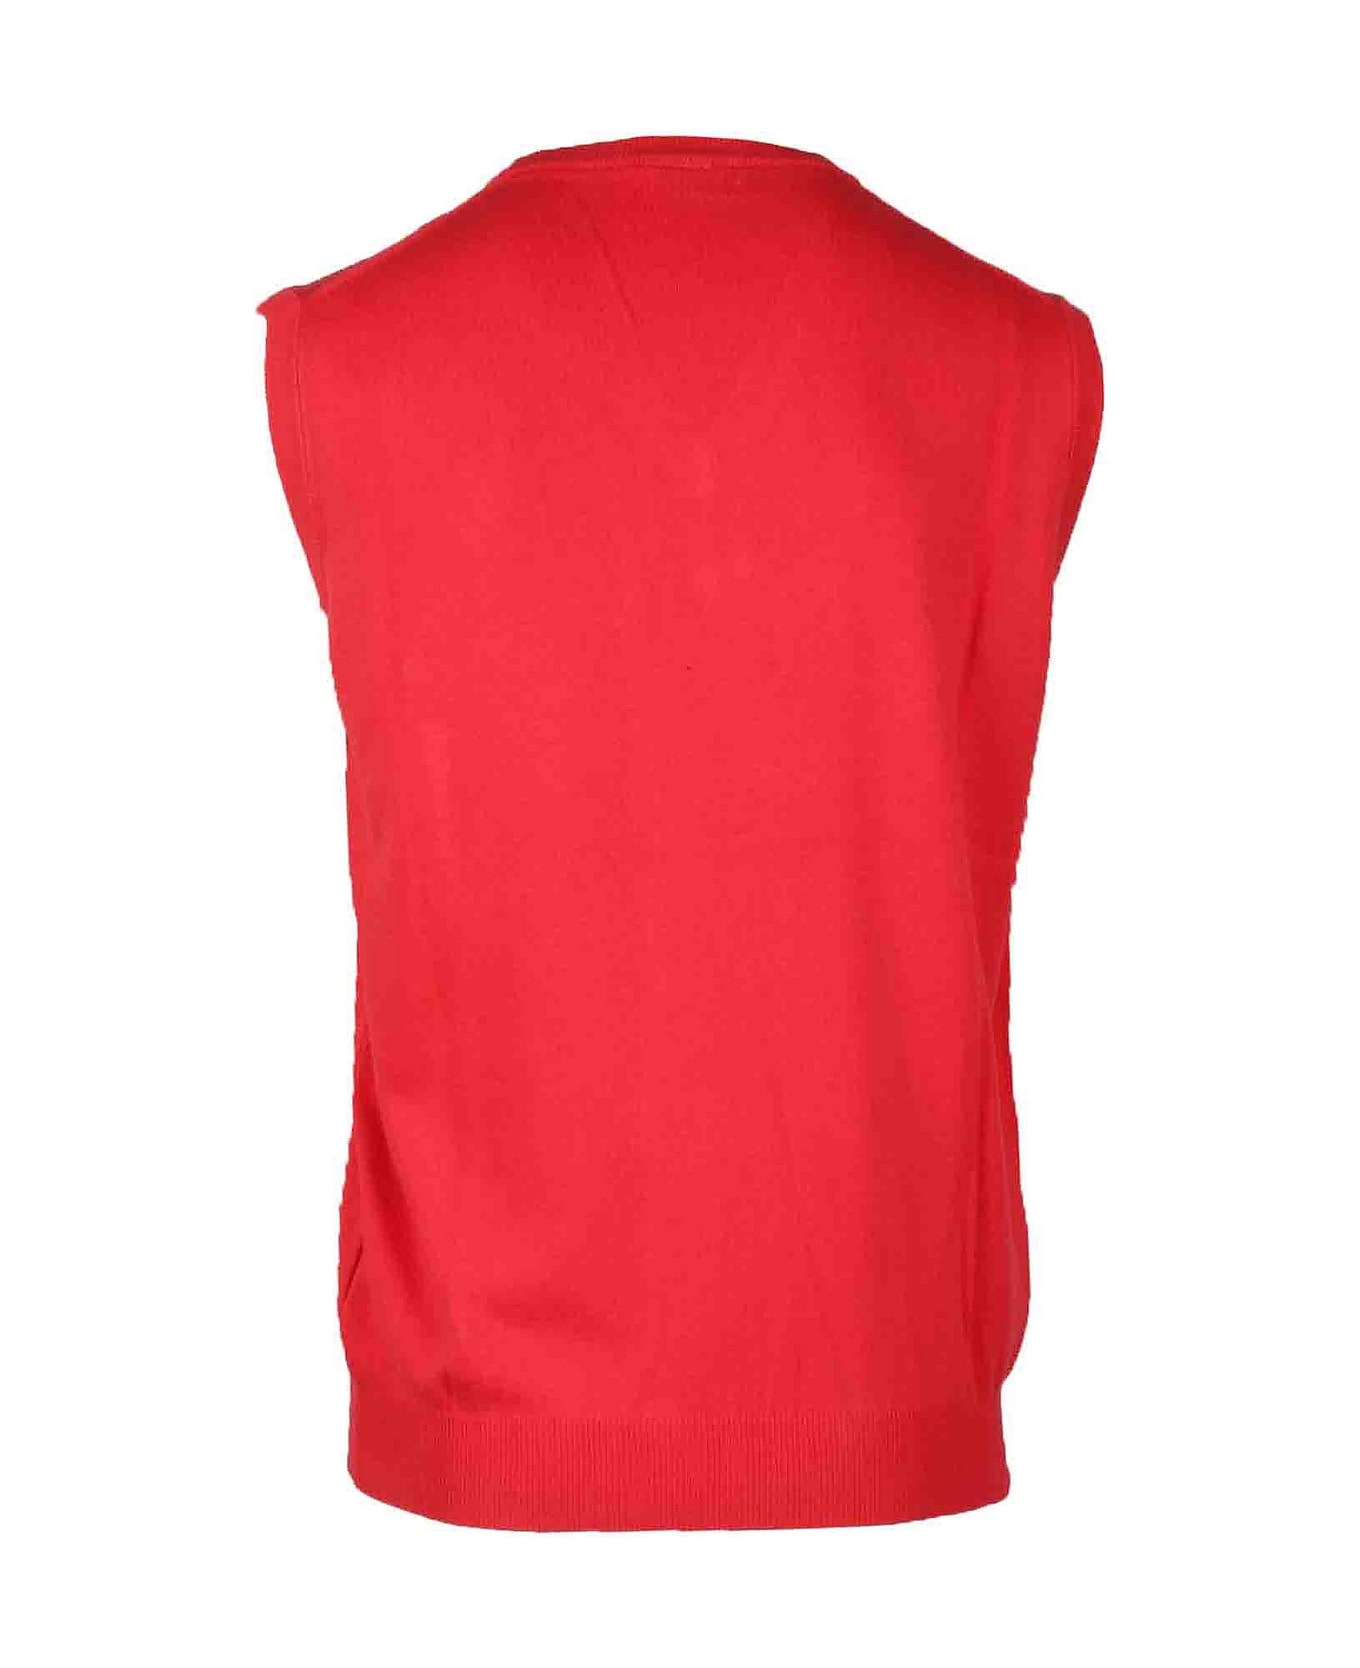 North Sails Men's Red Sweater - Red